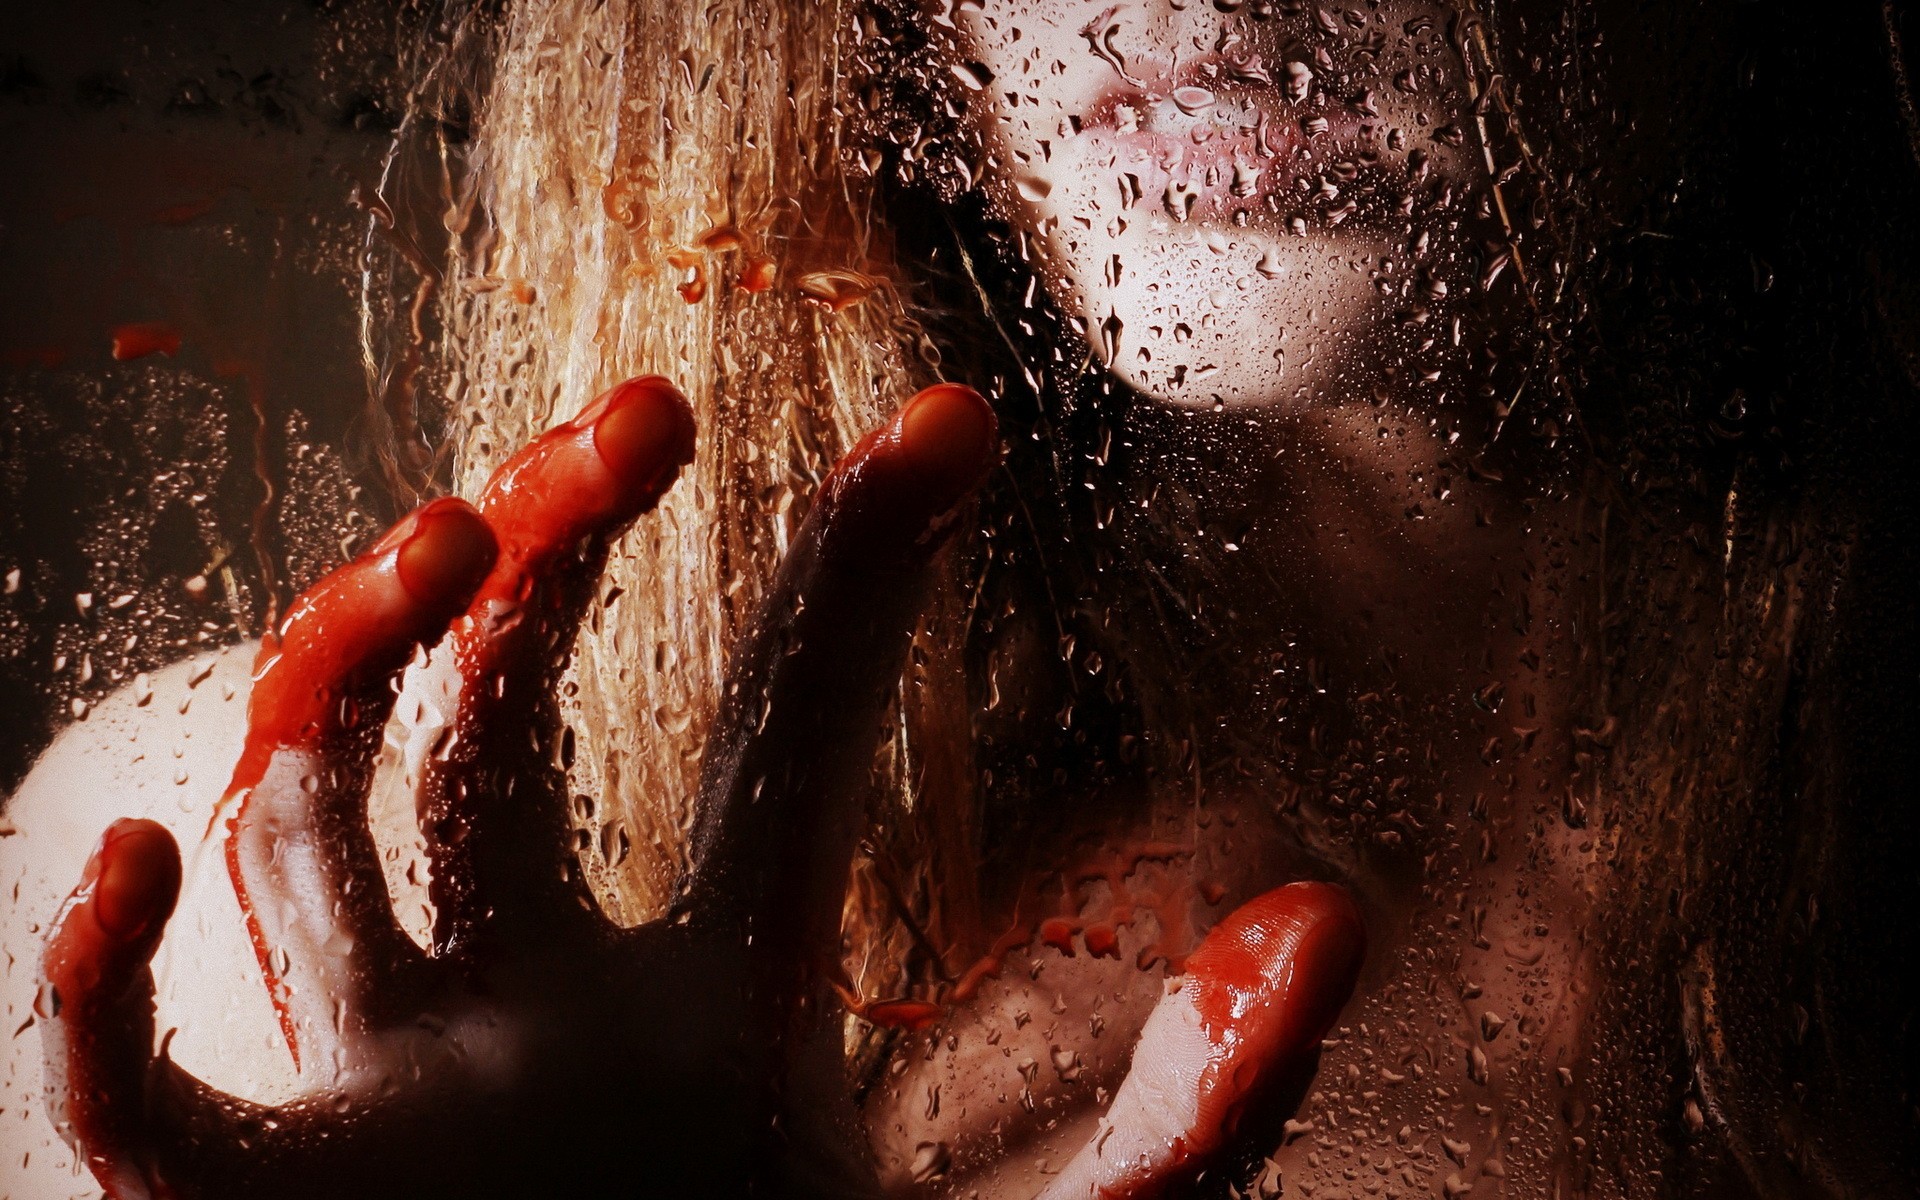 People 1920x1200 women blood murder water on glass Psycho behind the glass closeup